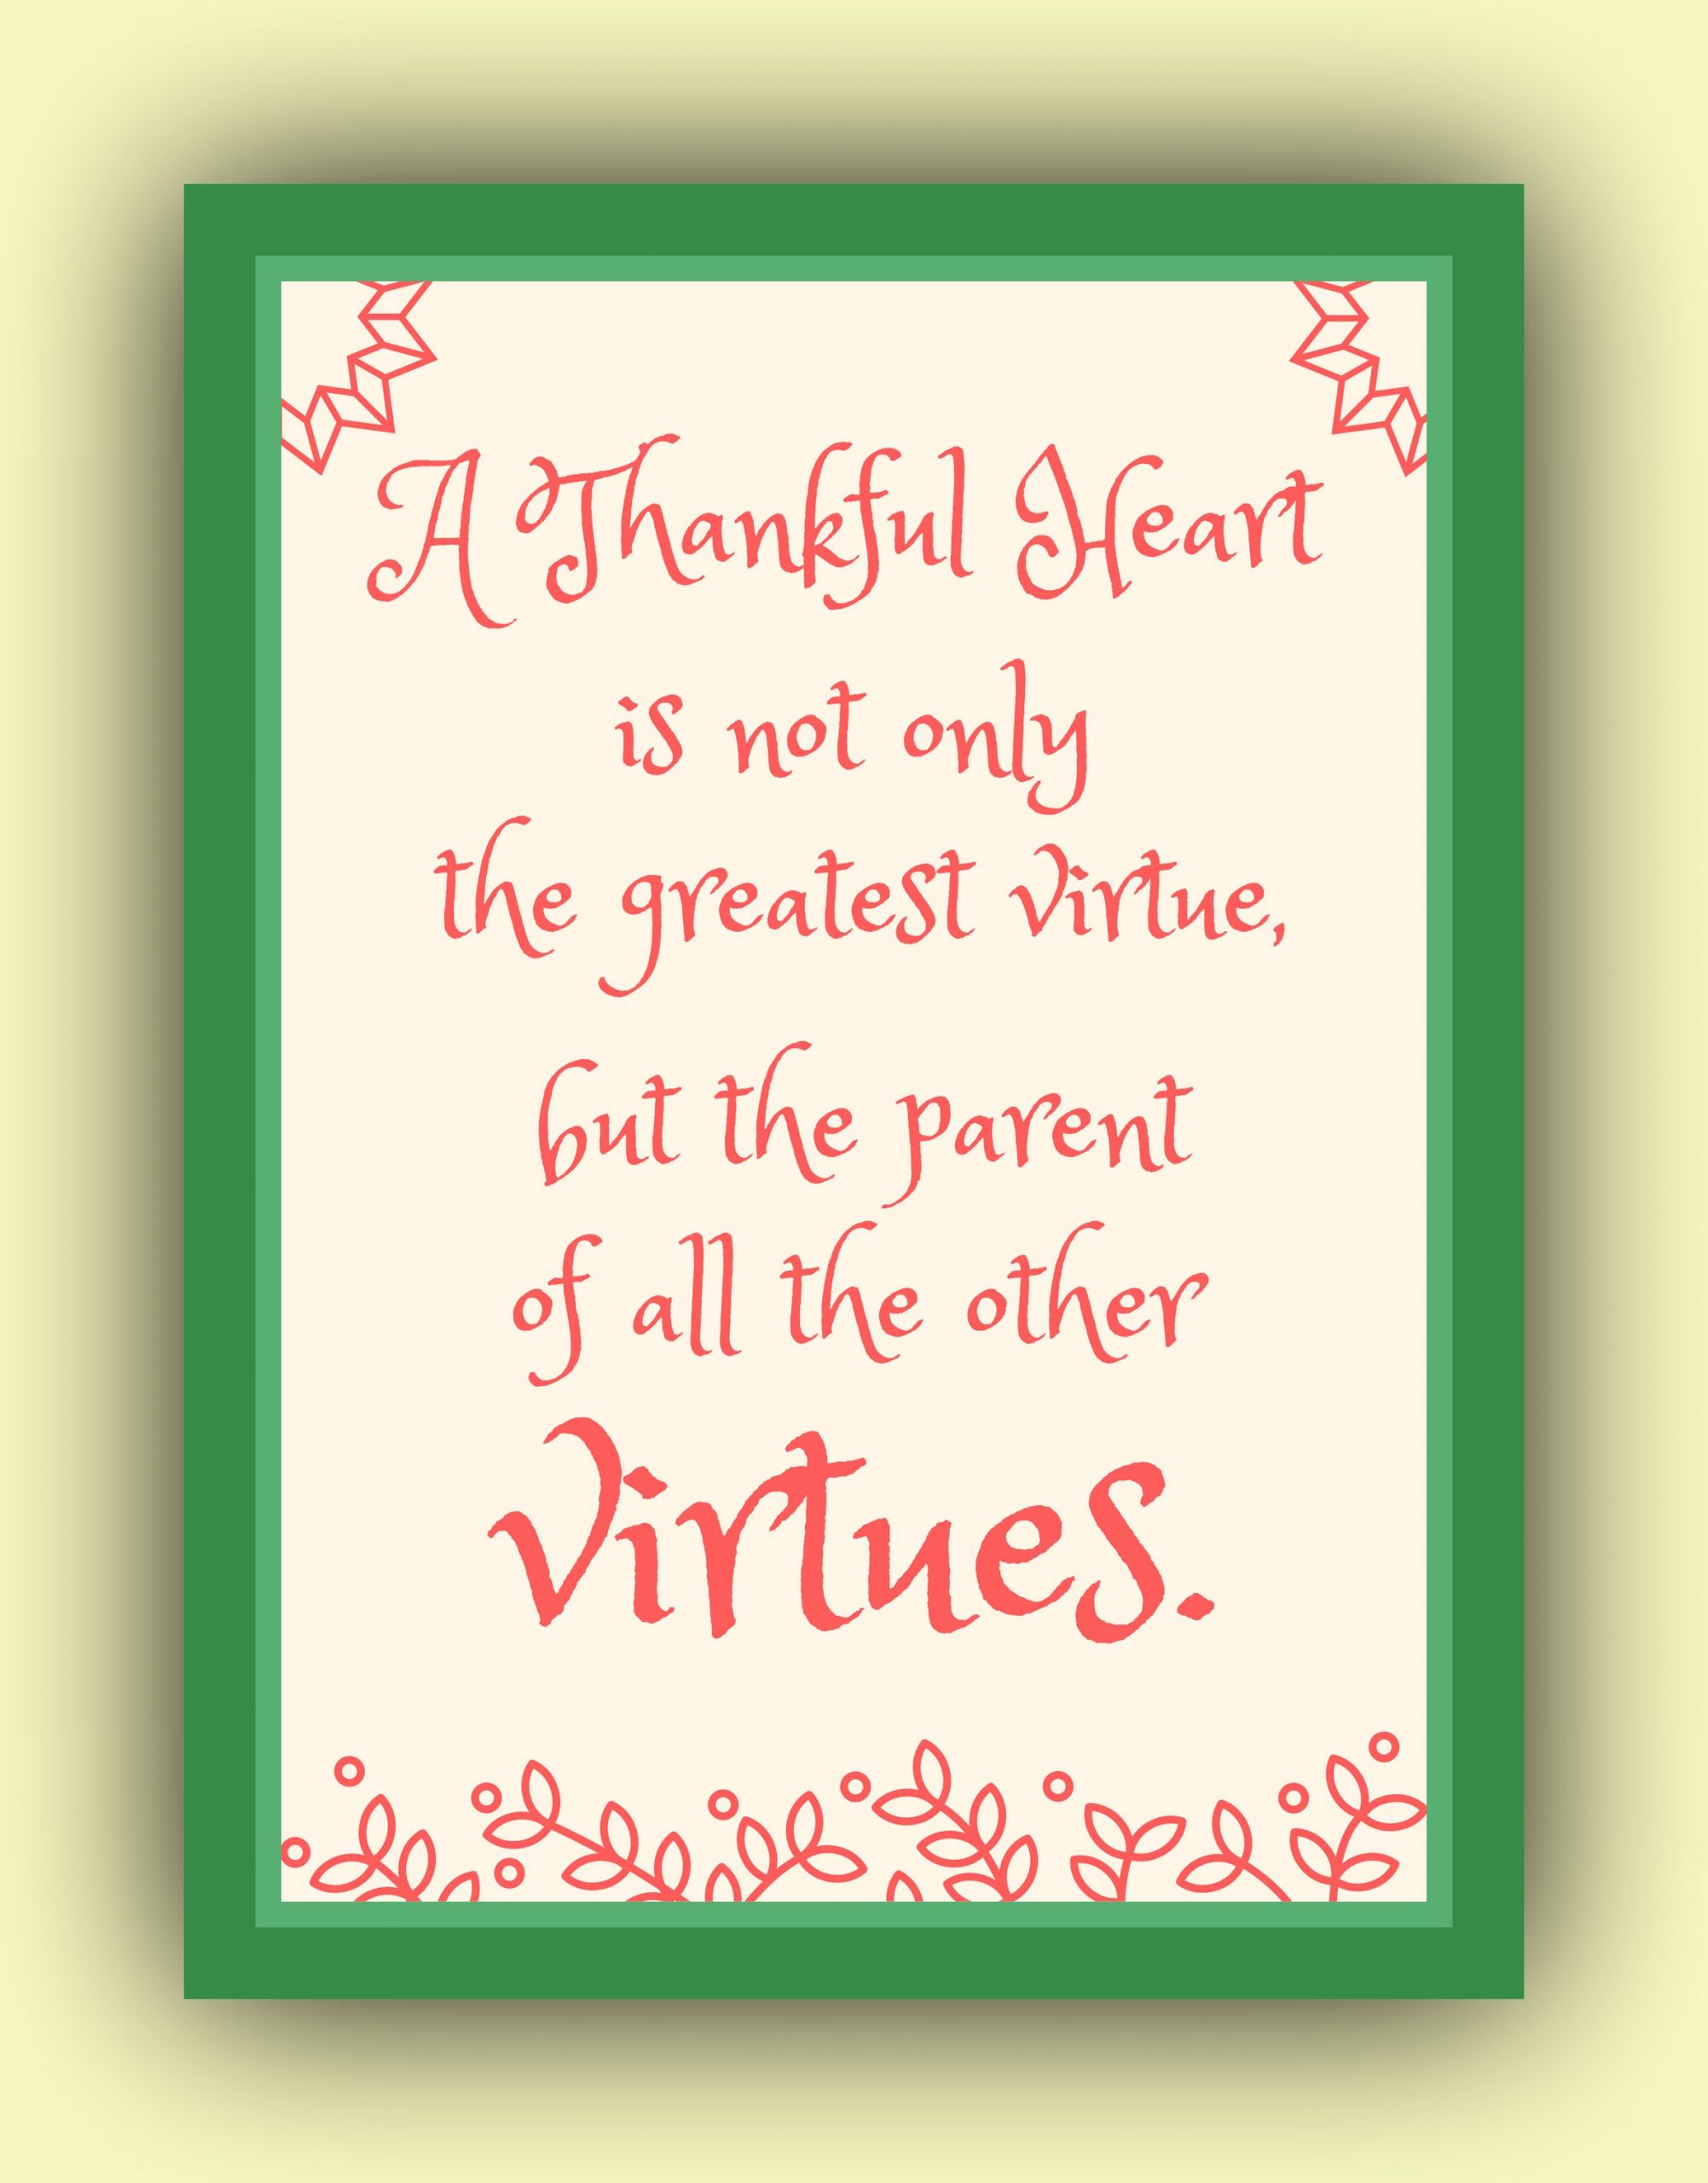 Thanksgiving Quotes Thanksgivingquotes
 25 Happy Thanksgiving Quotes As family and friends gather